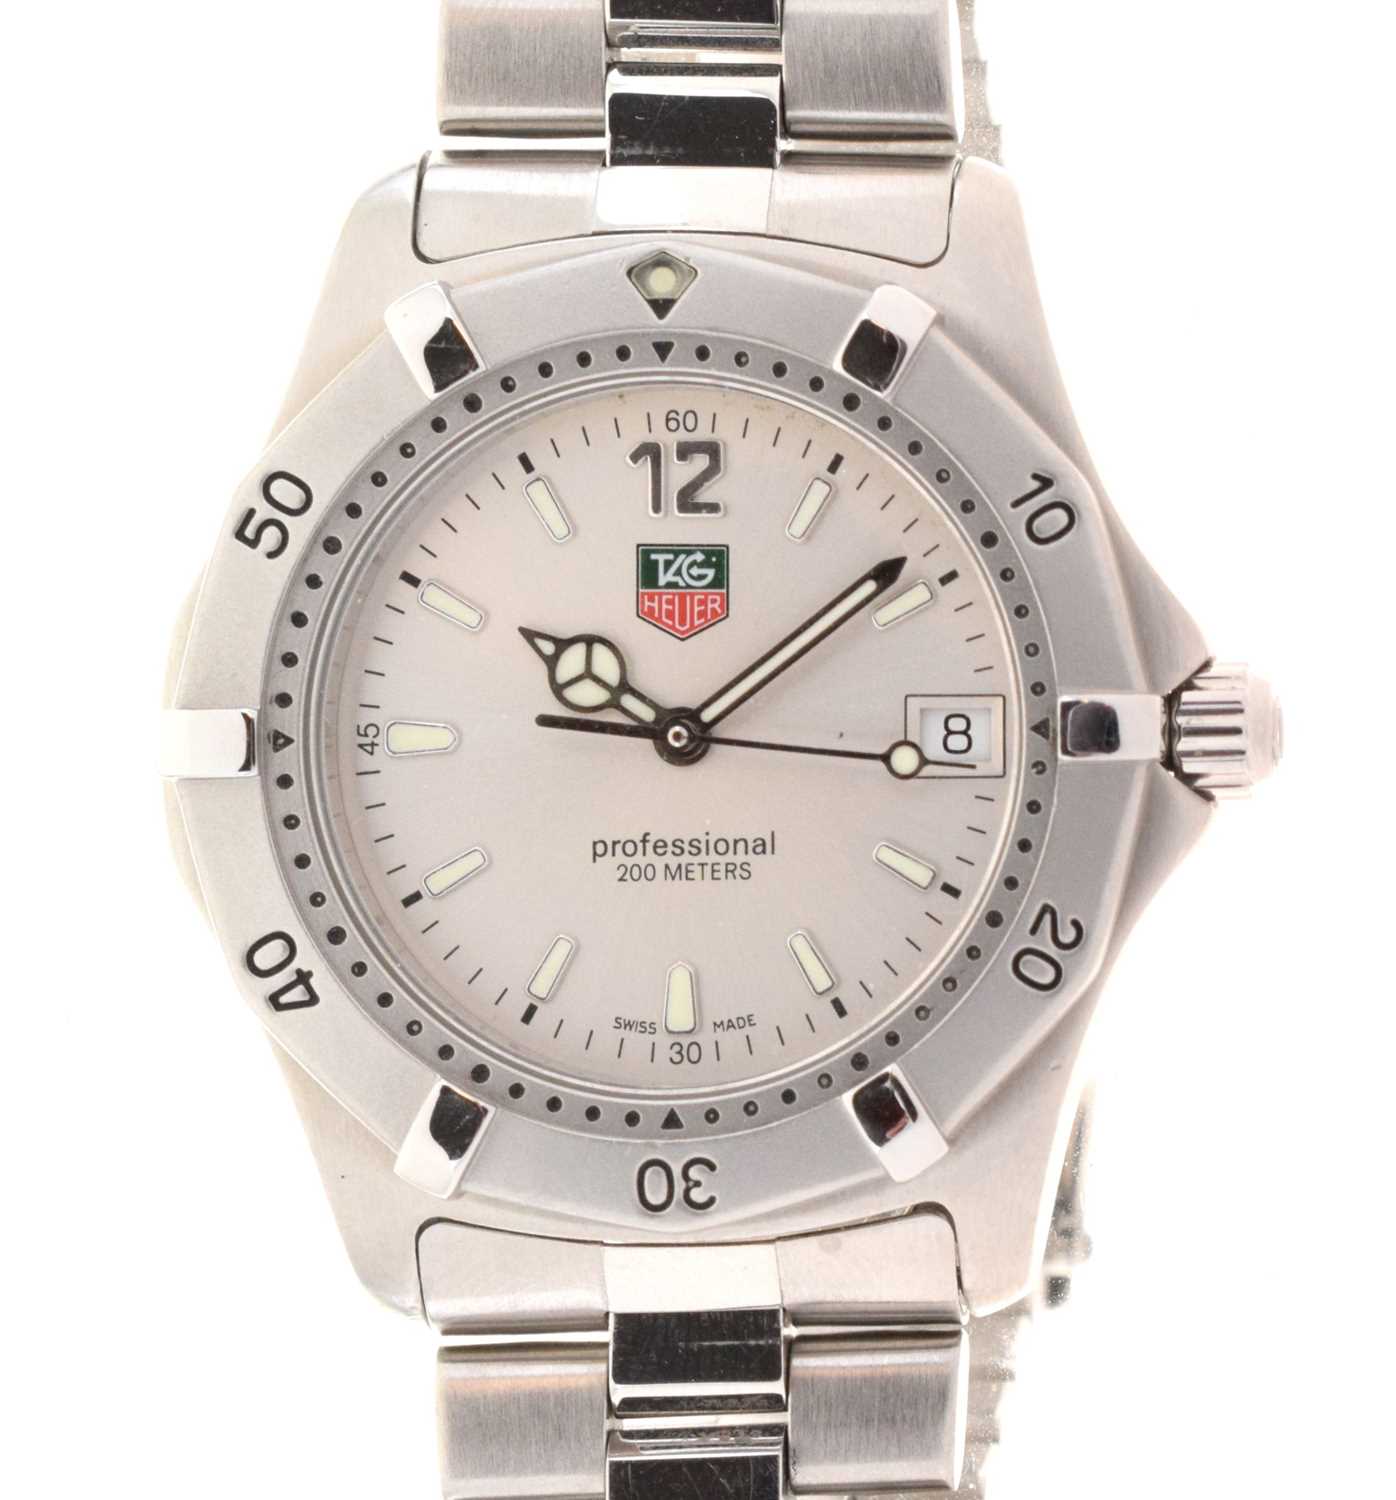 Lot 74 - Tag Heuer- Gentleman's Professional stainless steel wristwatch